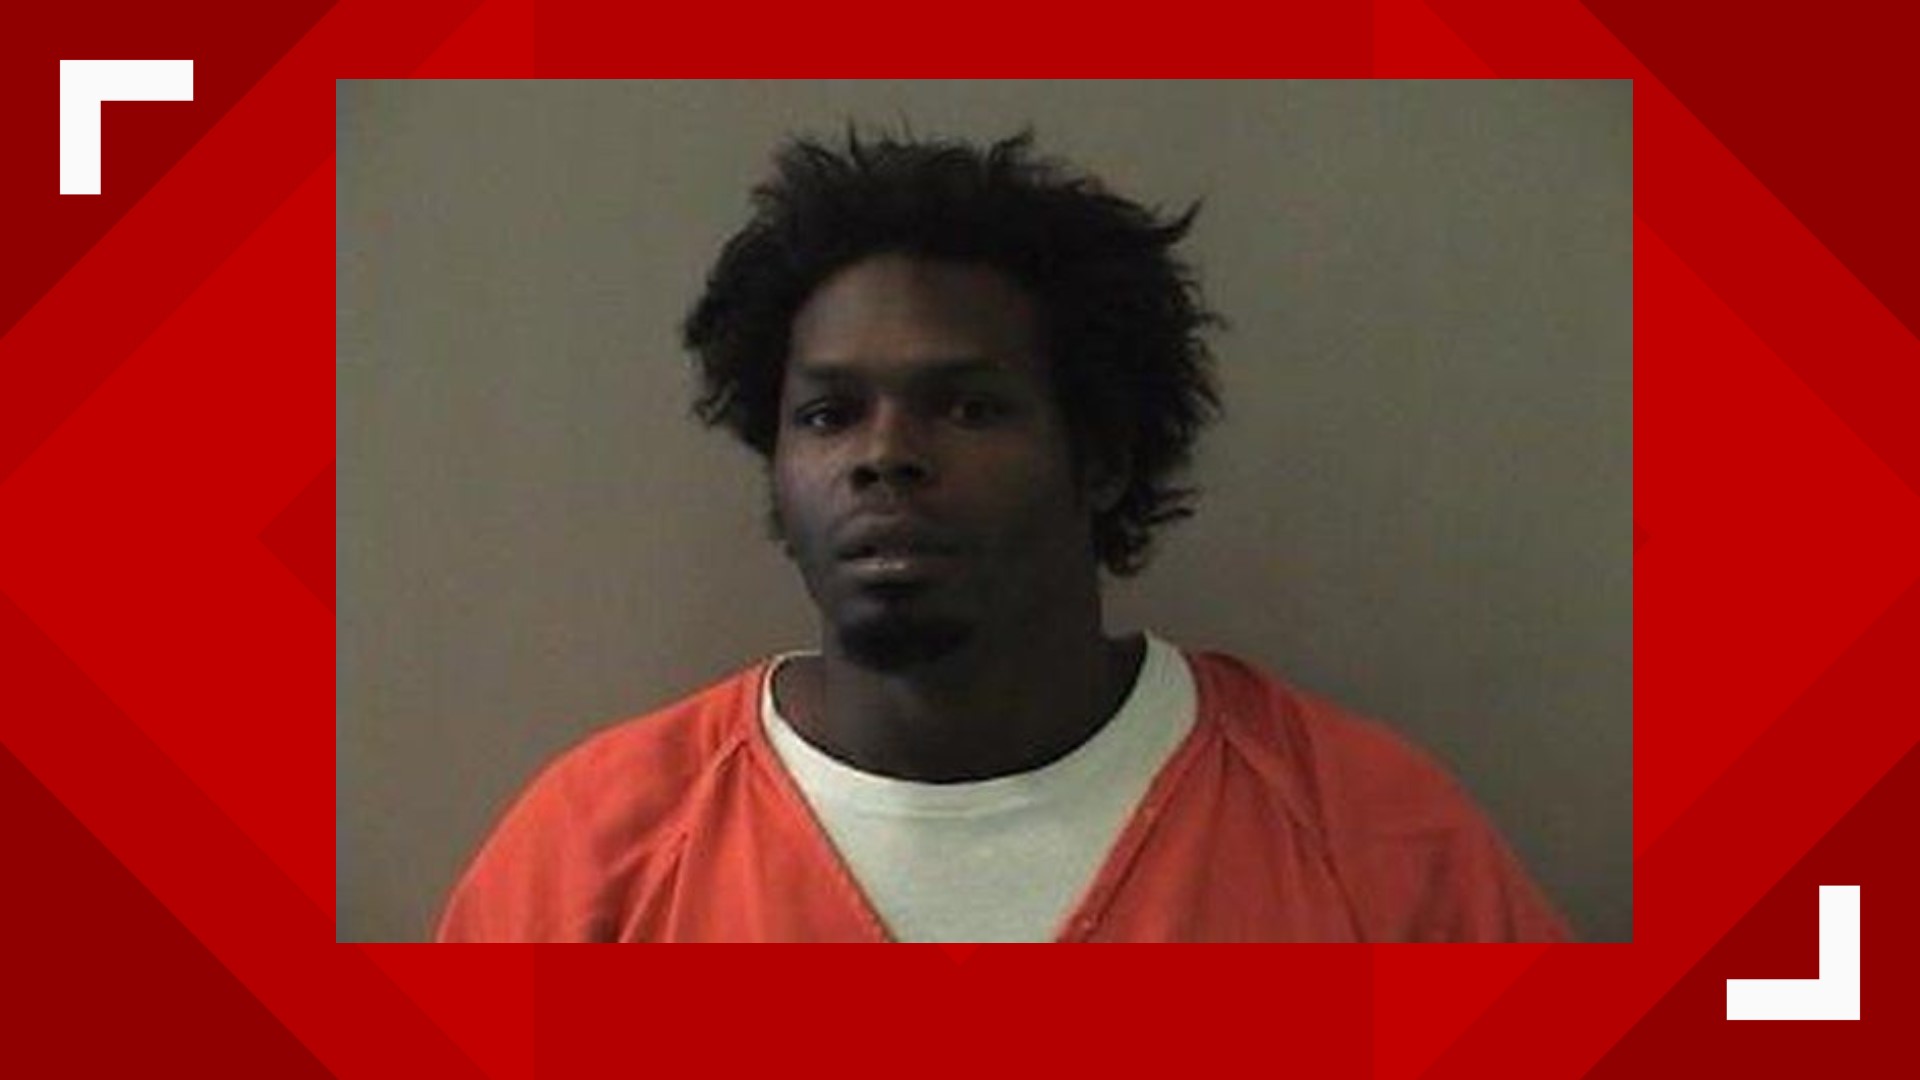 Officers were serving a no-knock warrant for James Reed at the home before the shooting, police said. Reed was a known drug dealer who was "always armed" and had a criminal history of terroristic threats, robbery and selling drugs, police said.